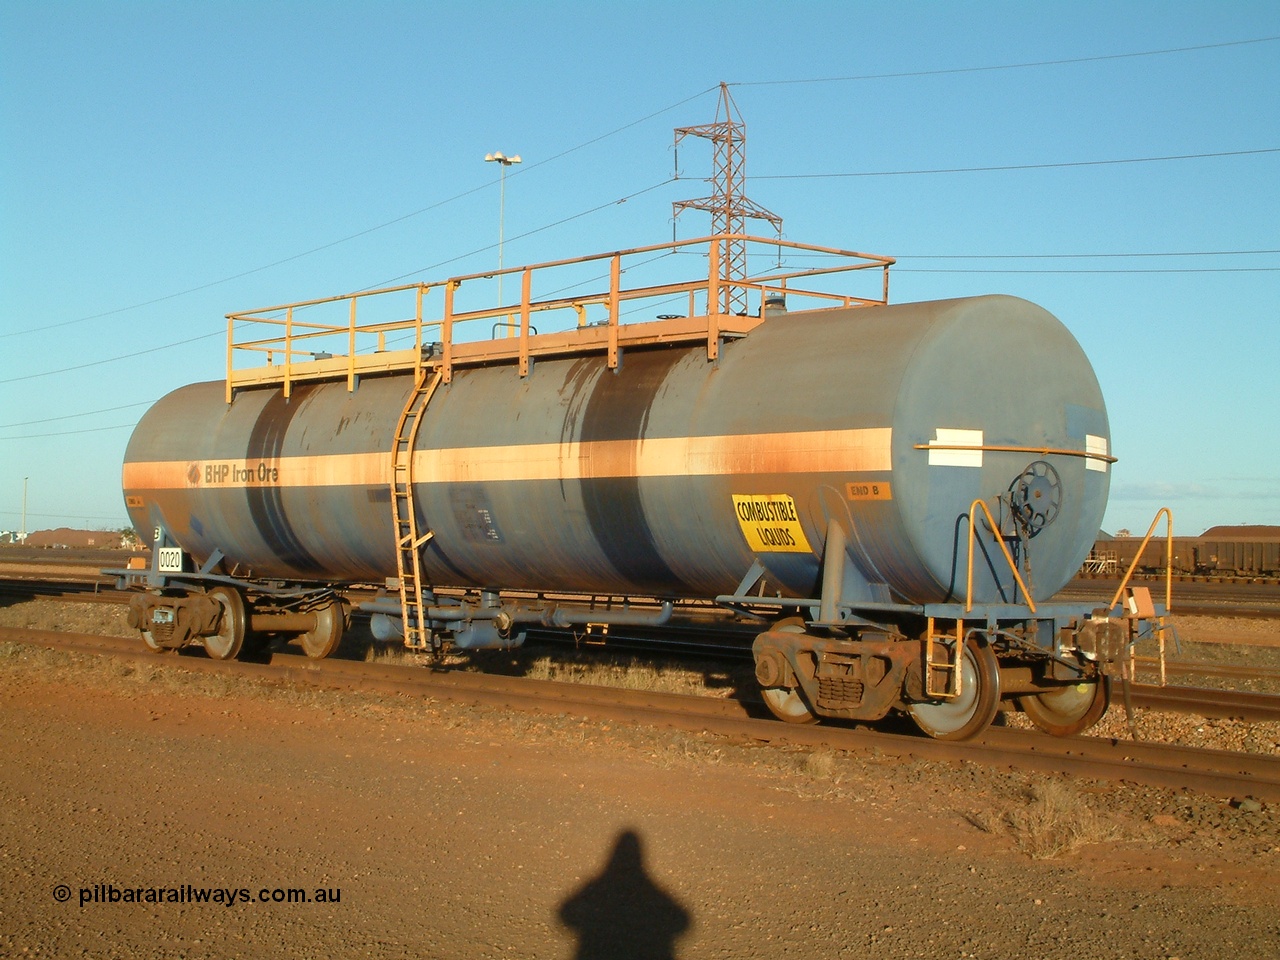 040815 171312
Nelson Point, fuel tank waggon 0020, 82 kilolitre capacity built by Comeng NSW for BP as RTC 2, used by Mt Newman Mining, unsure when converted to 0020.
Keywords: Comeng-NSW;RTC2;BHP-tank-waggon;